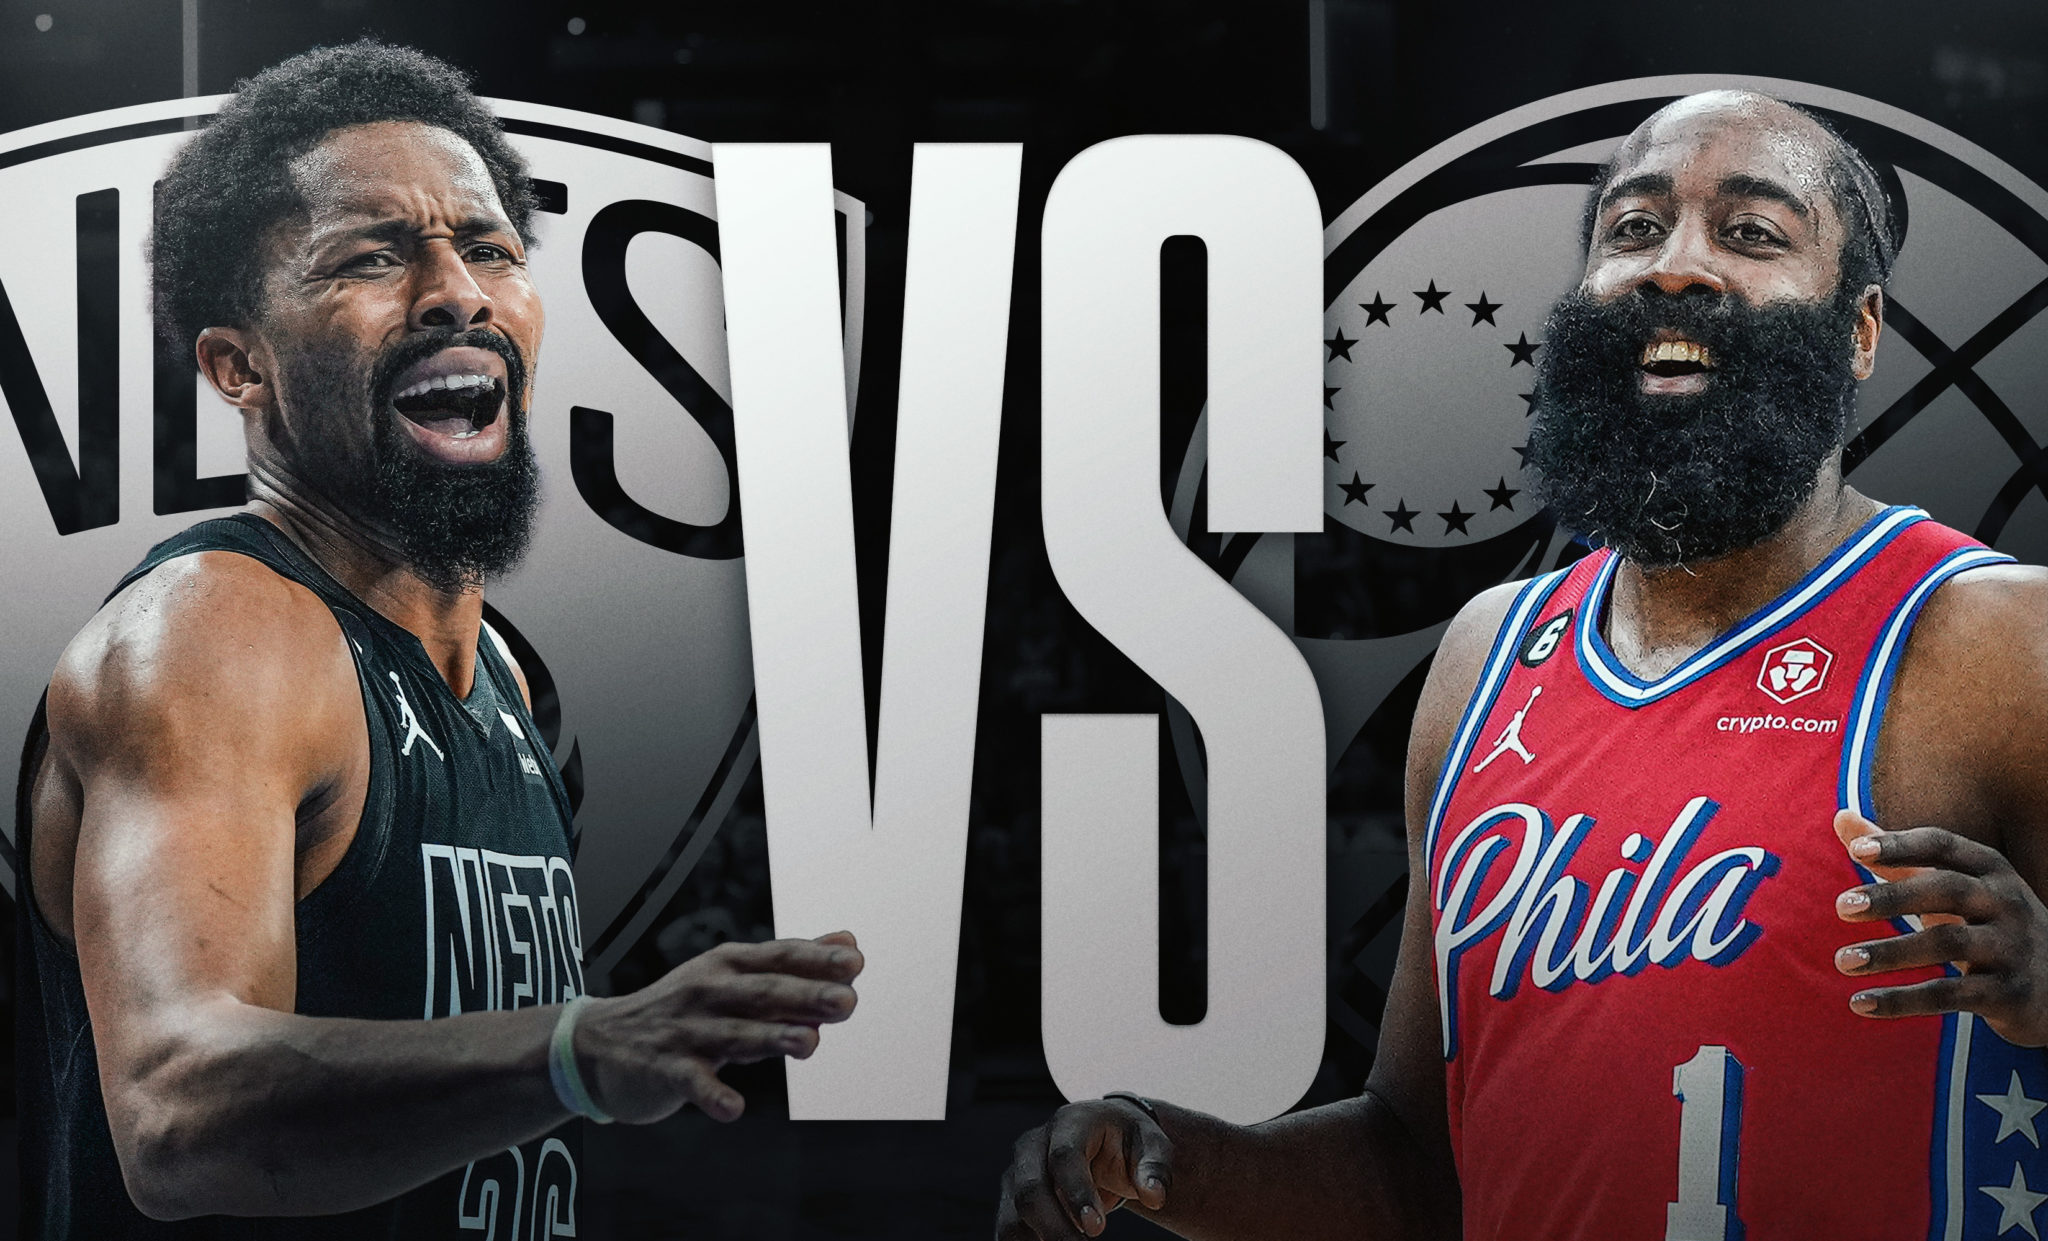 Philadelphia Lead Series 1-0: 76ers vs. Nets Game 2 Playoff Preview, Odds & Predictions